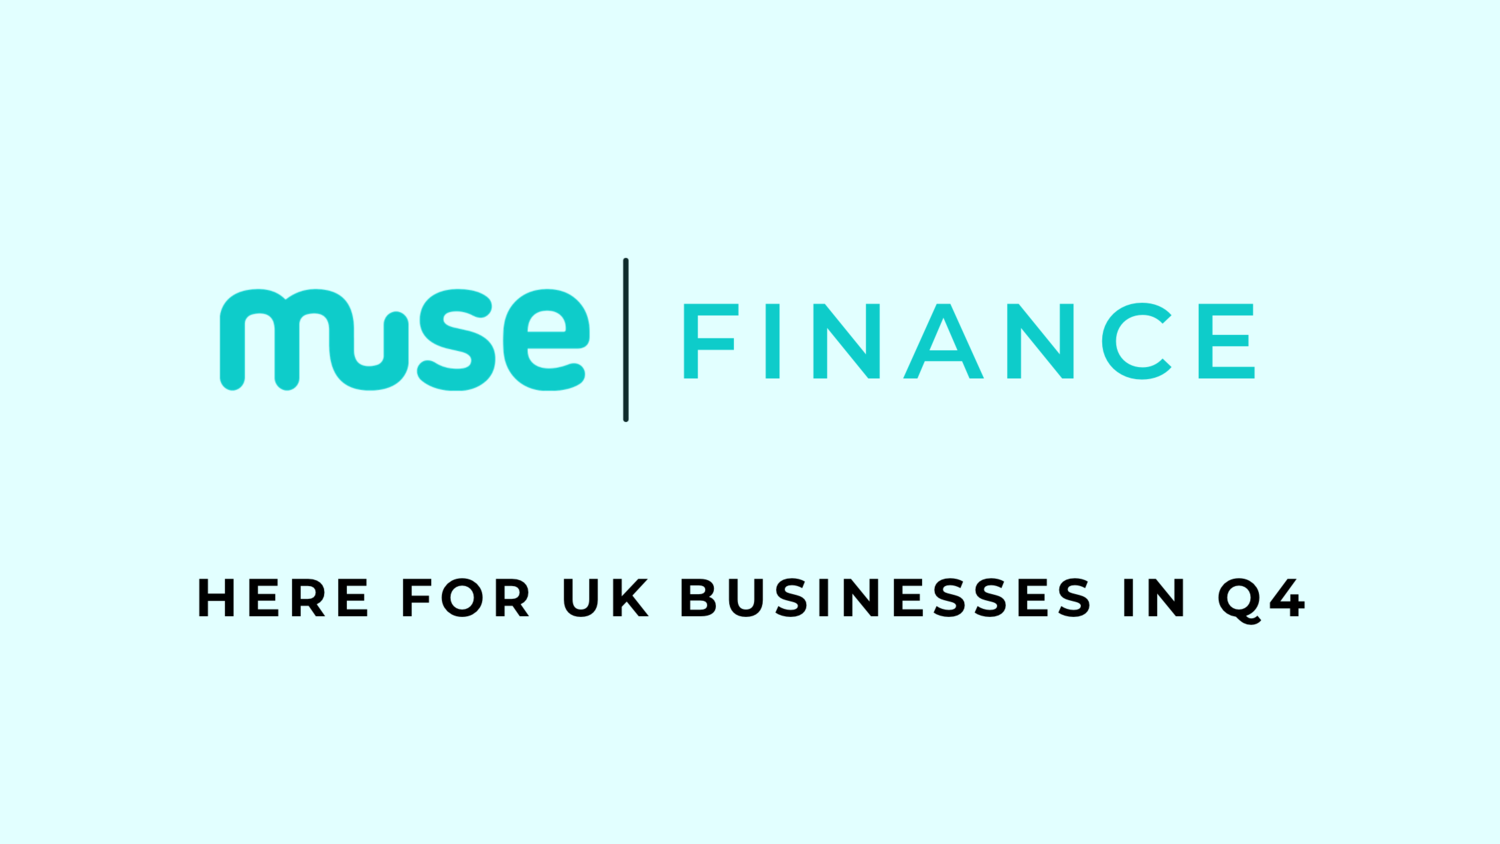 Muse Finance Appoints New CTO to Scale itsTechnology and the Business